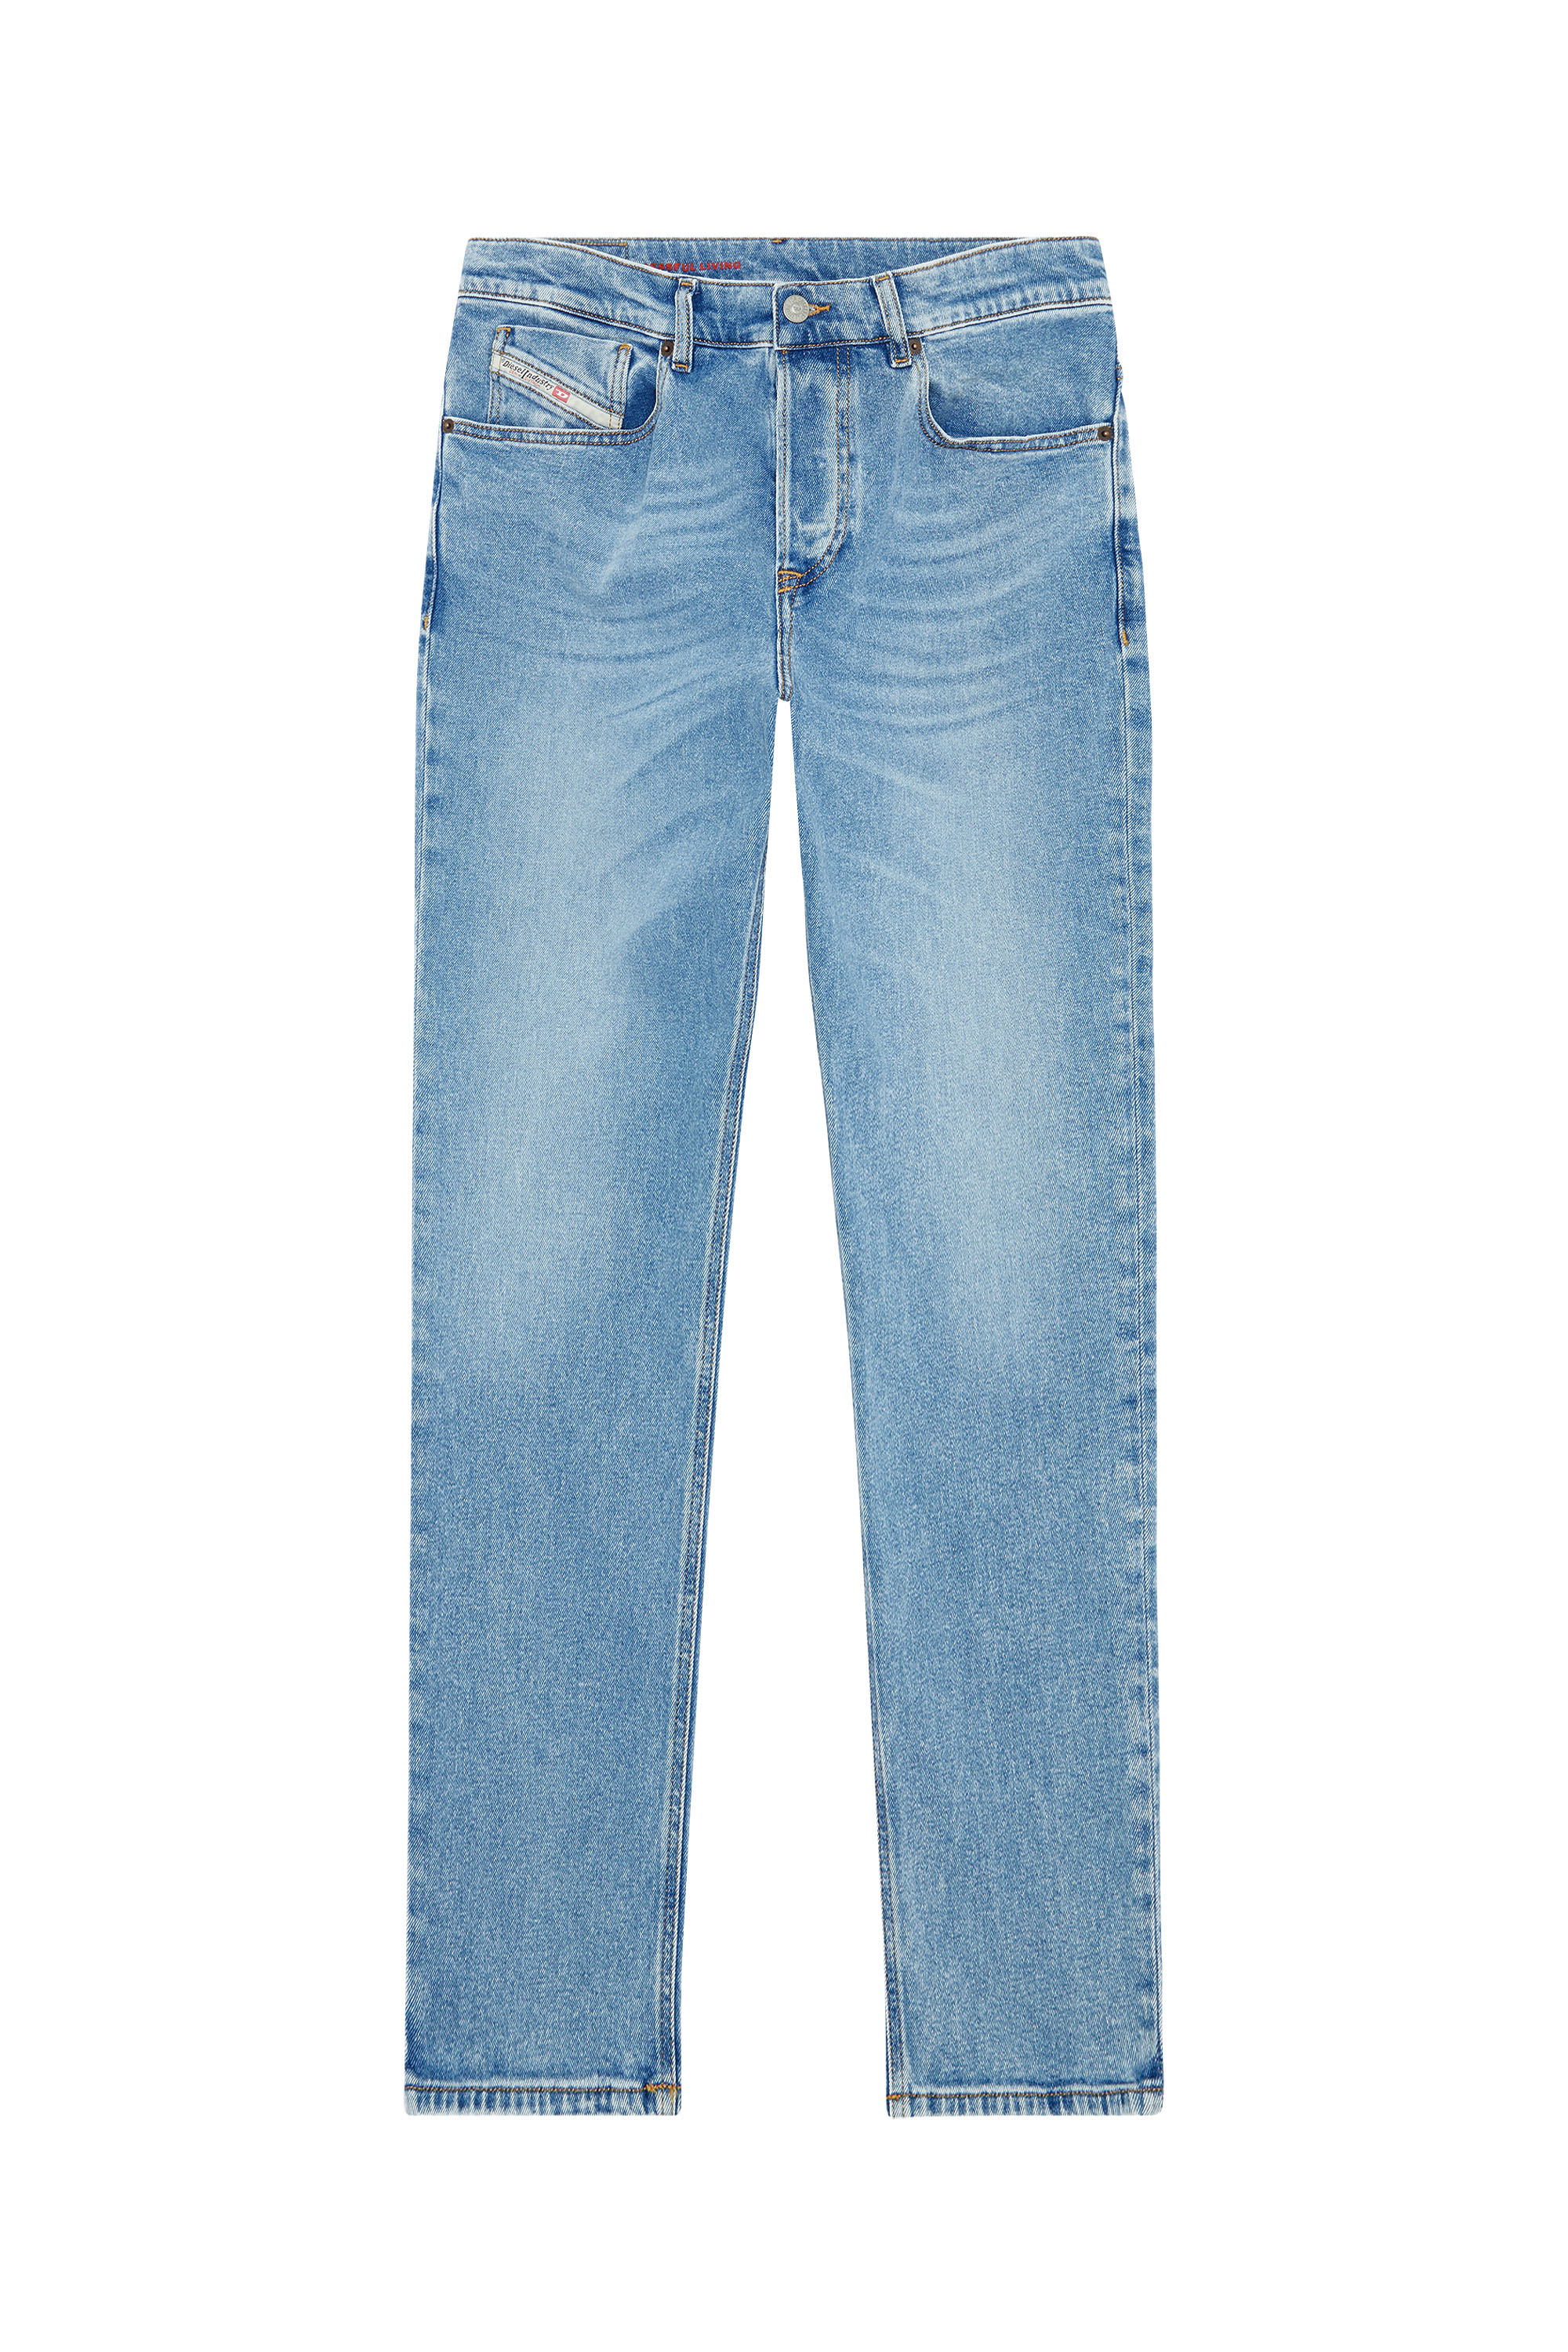 2005 D-Fining 9B92L Tapered Jeans, Light Blue - Jeans